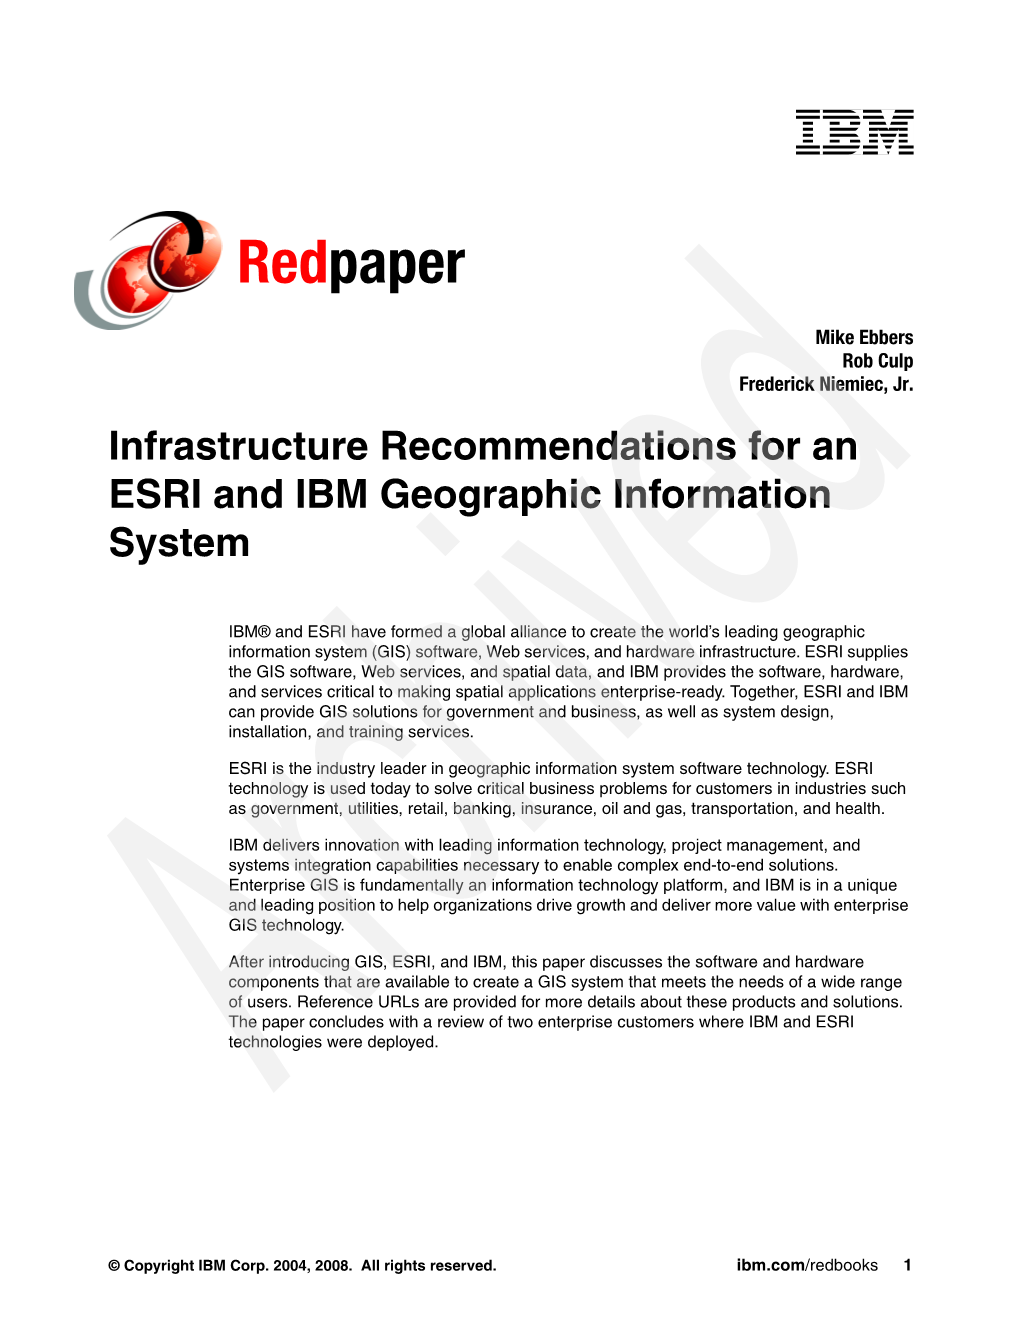 Infrastructure Recommendations for an ESRI and IBM Geographic Information System